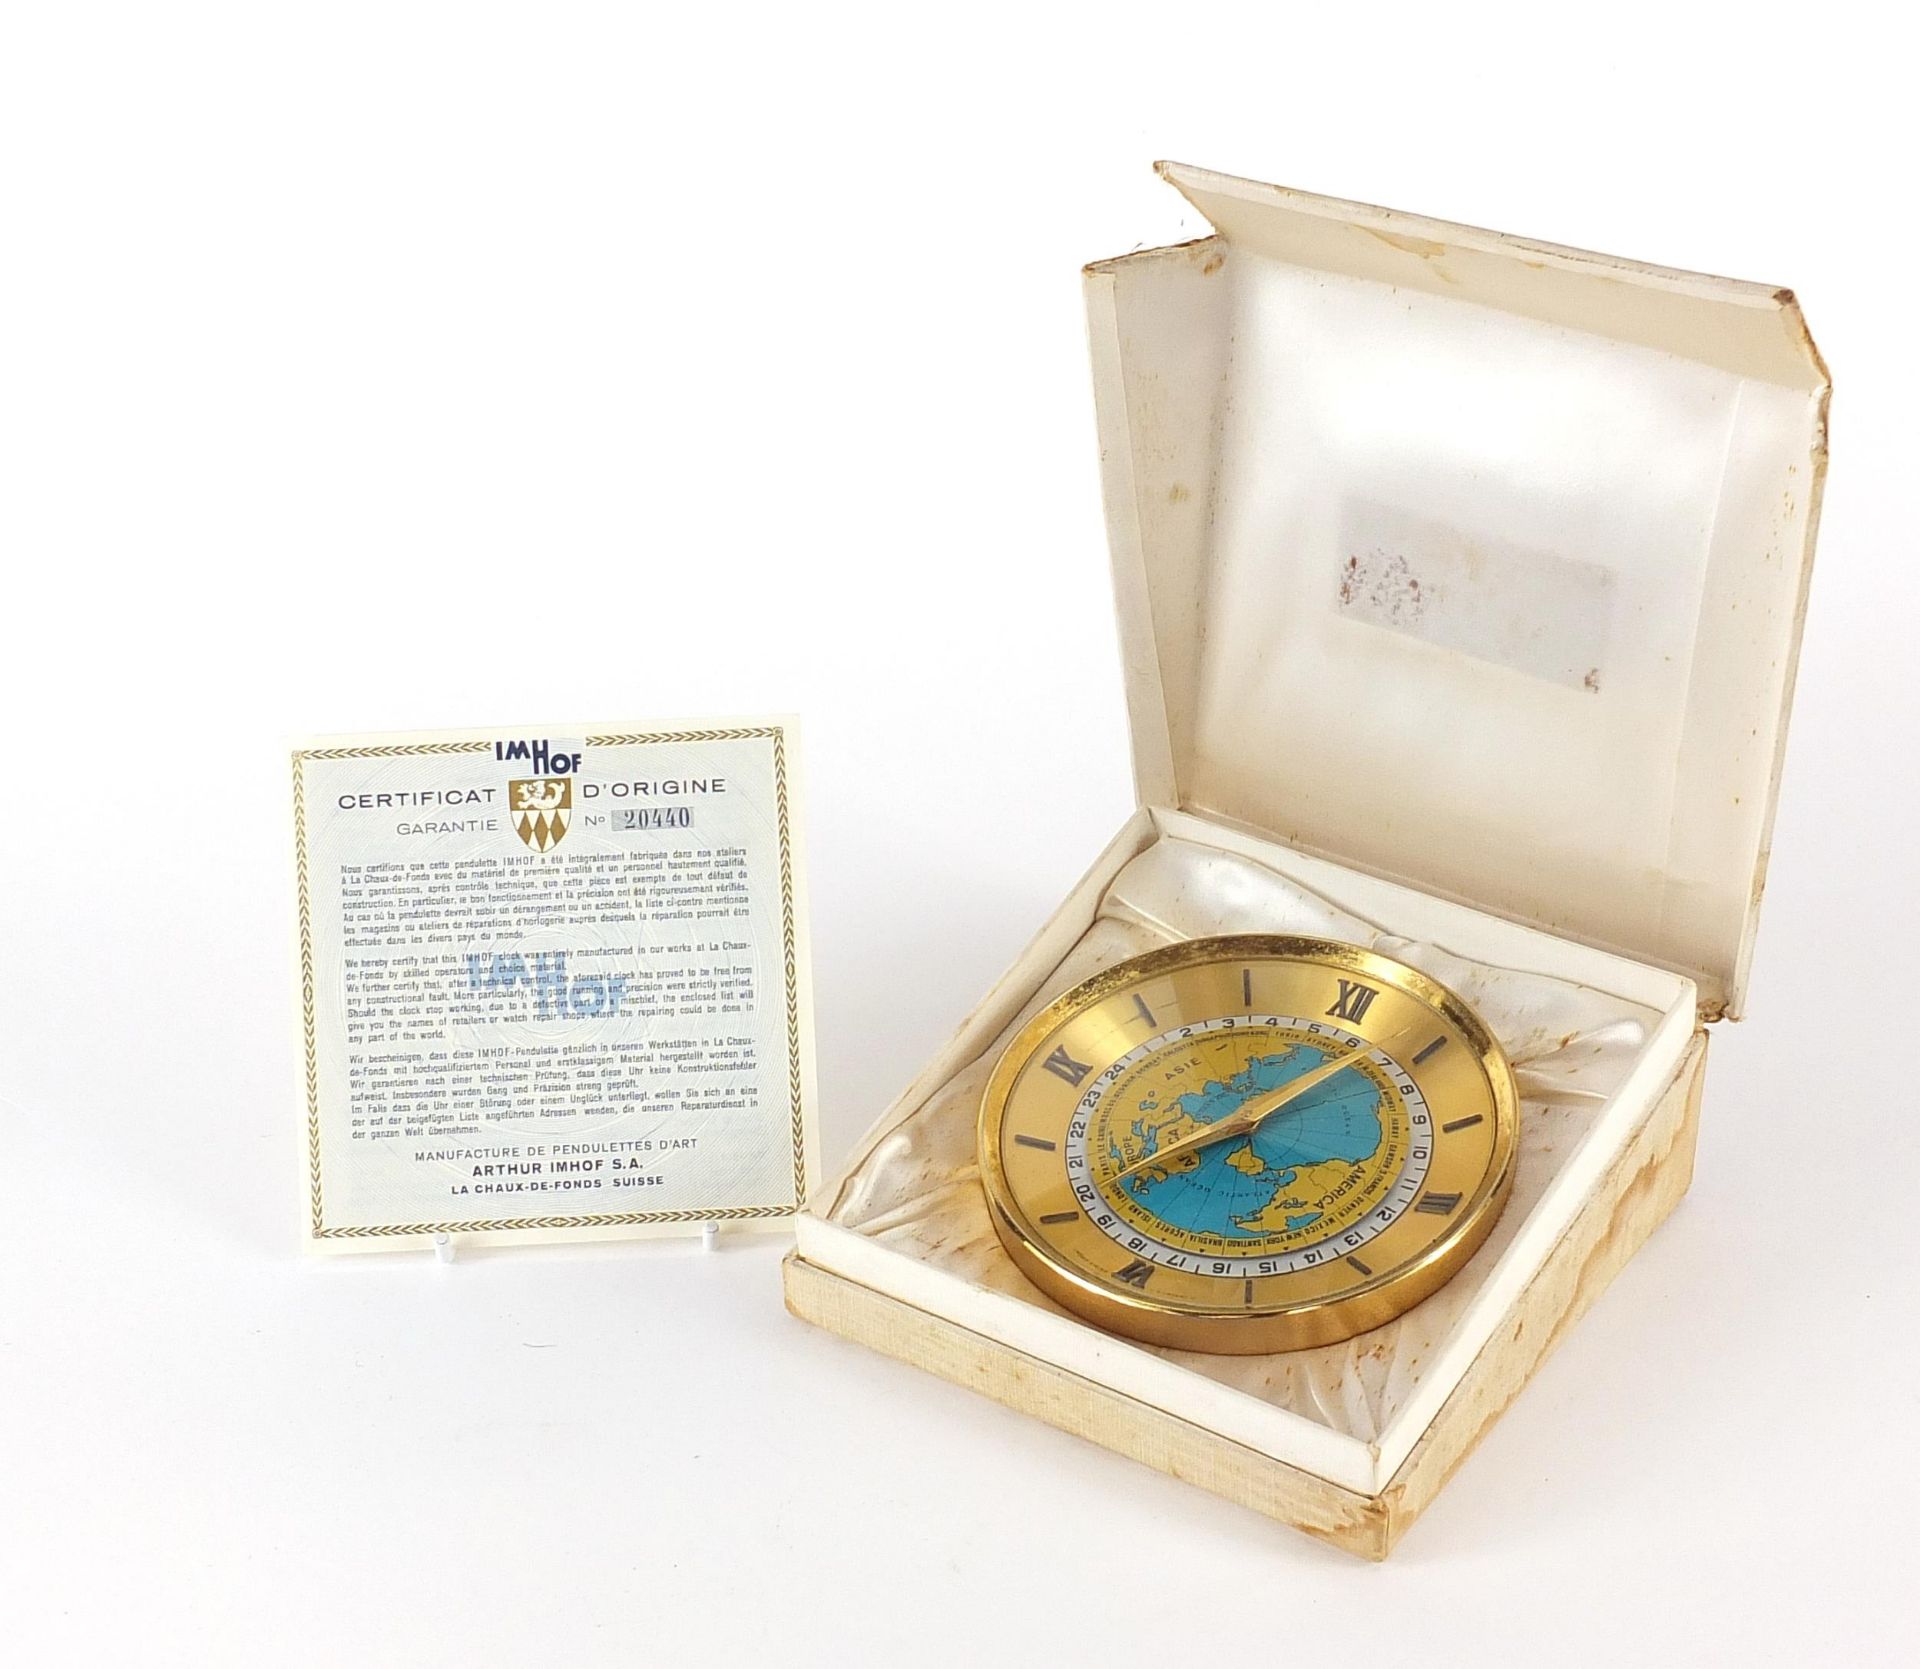 Vintage Imhof brass Universal Hour eight day clock with box numbered 1334769, 11cm in diameter